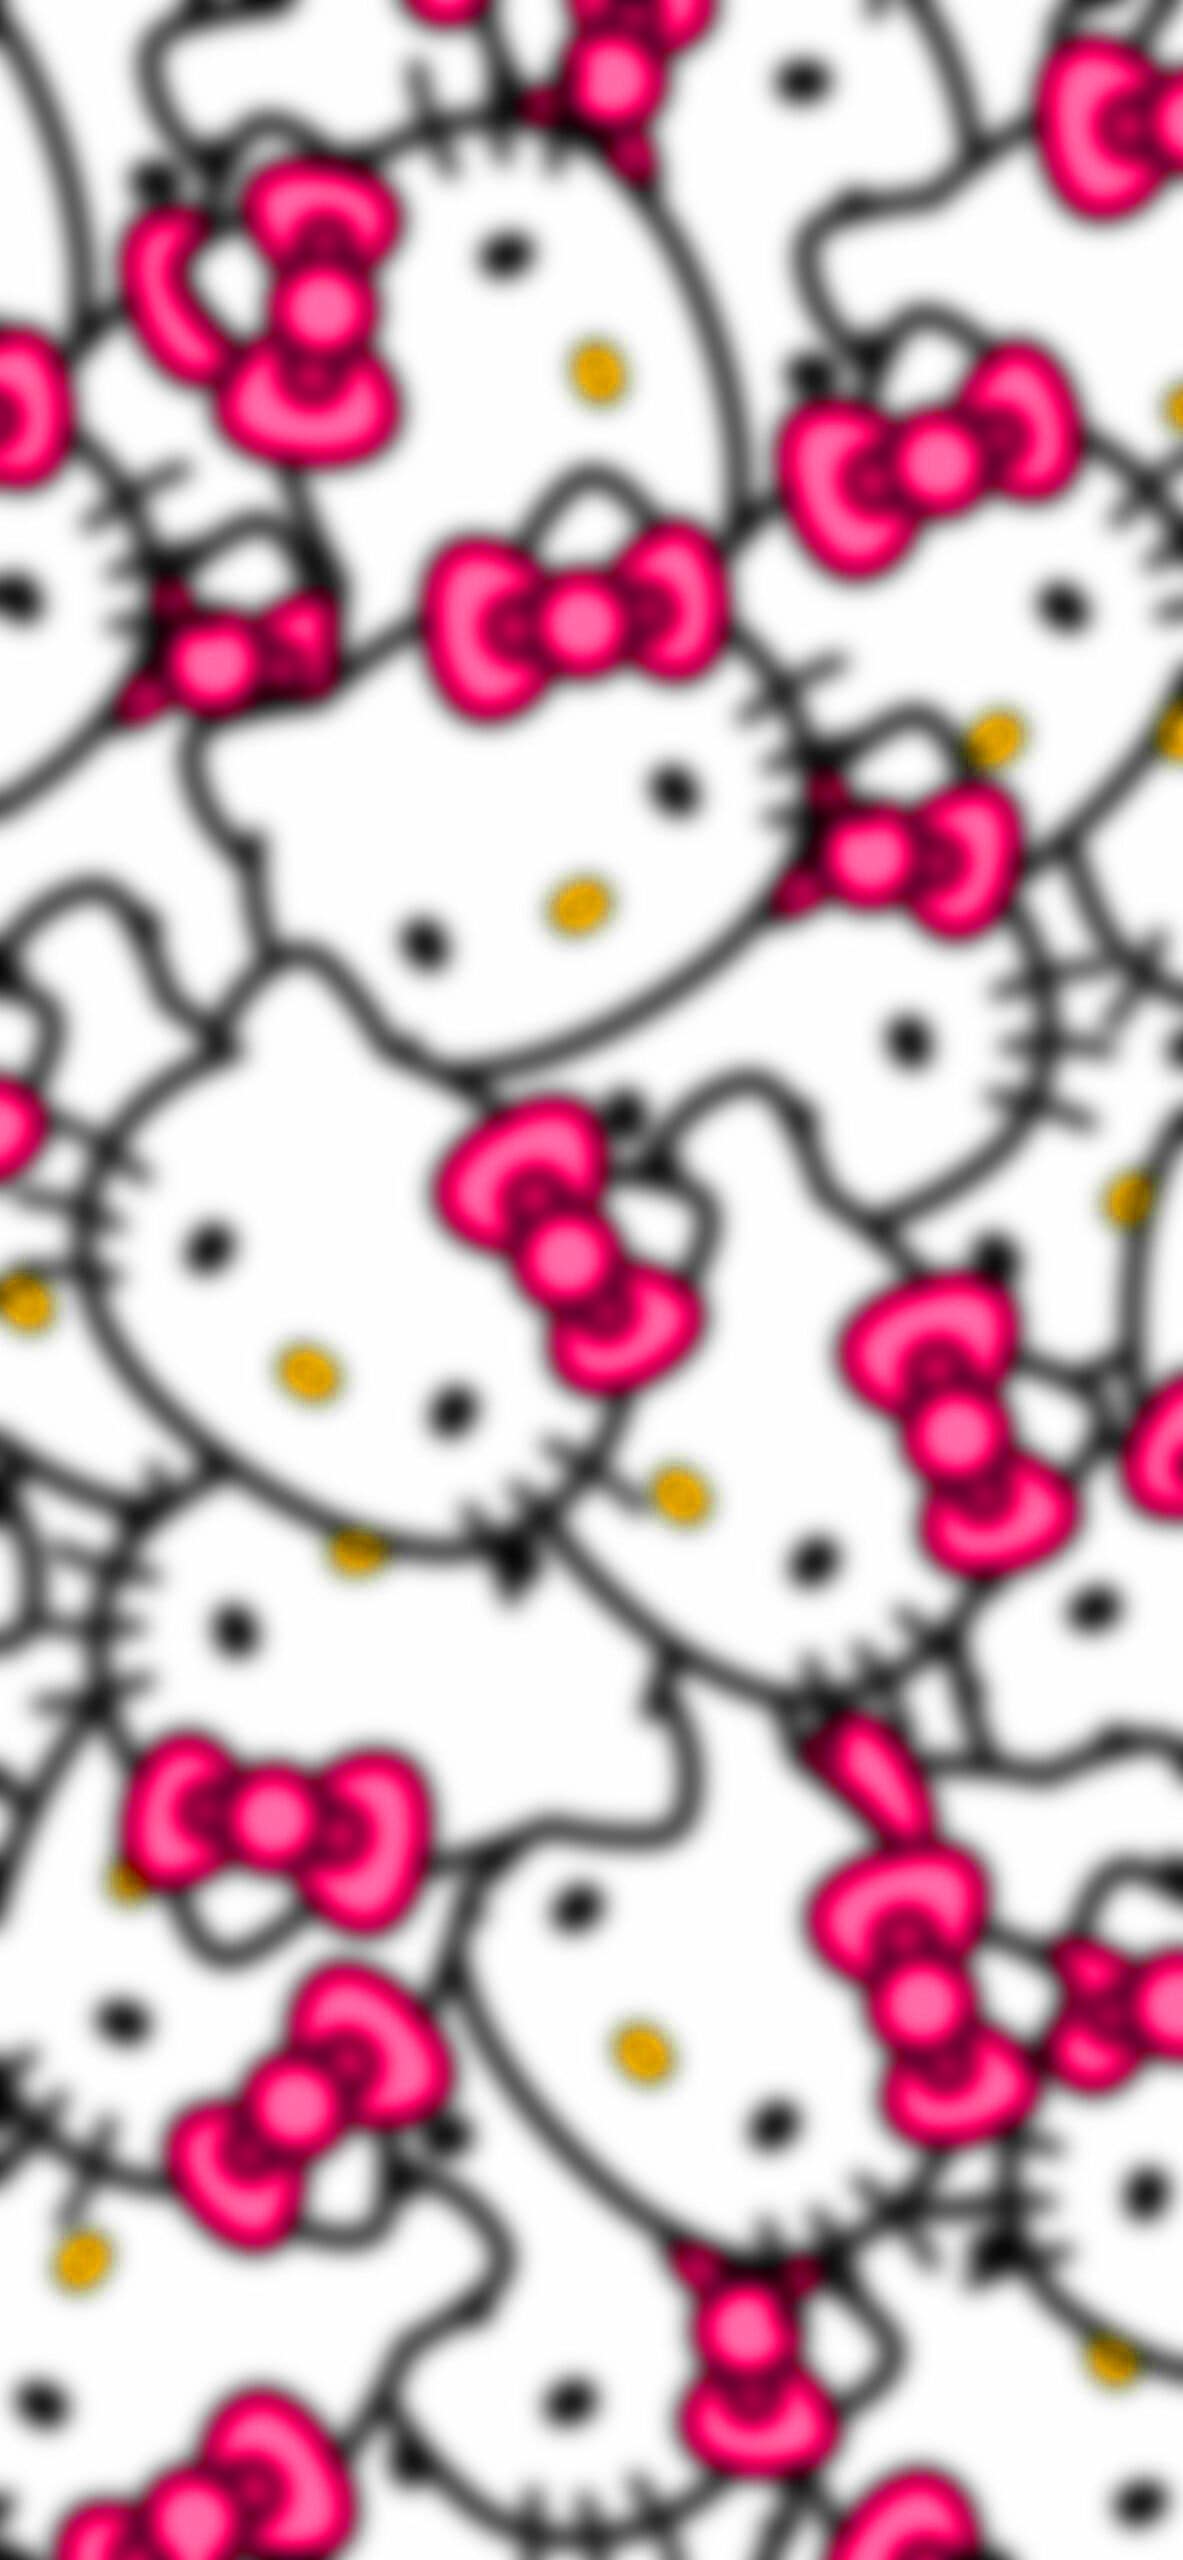 A close up of hello kitty in pink - Sanrio